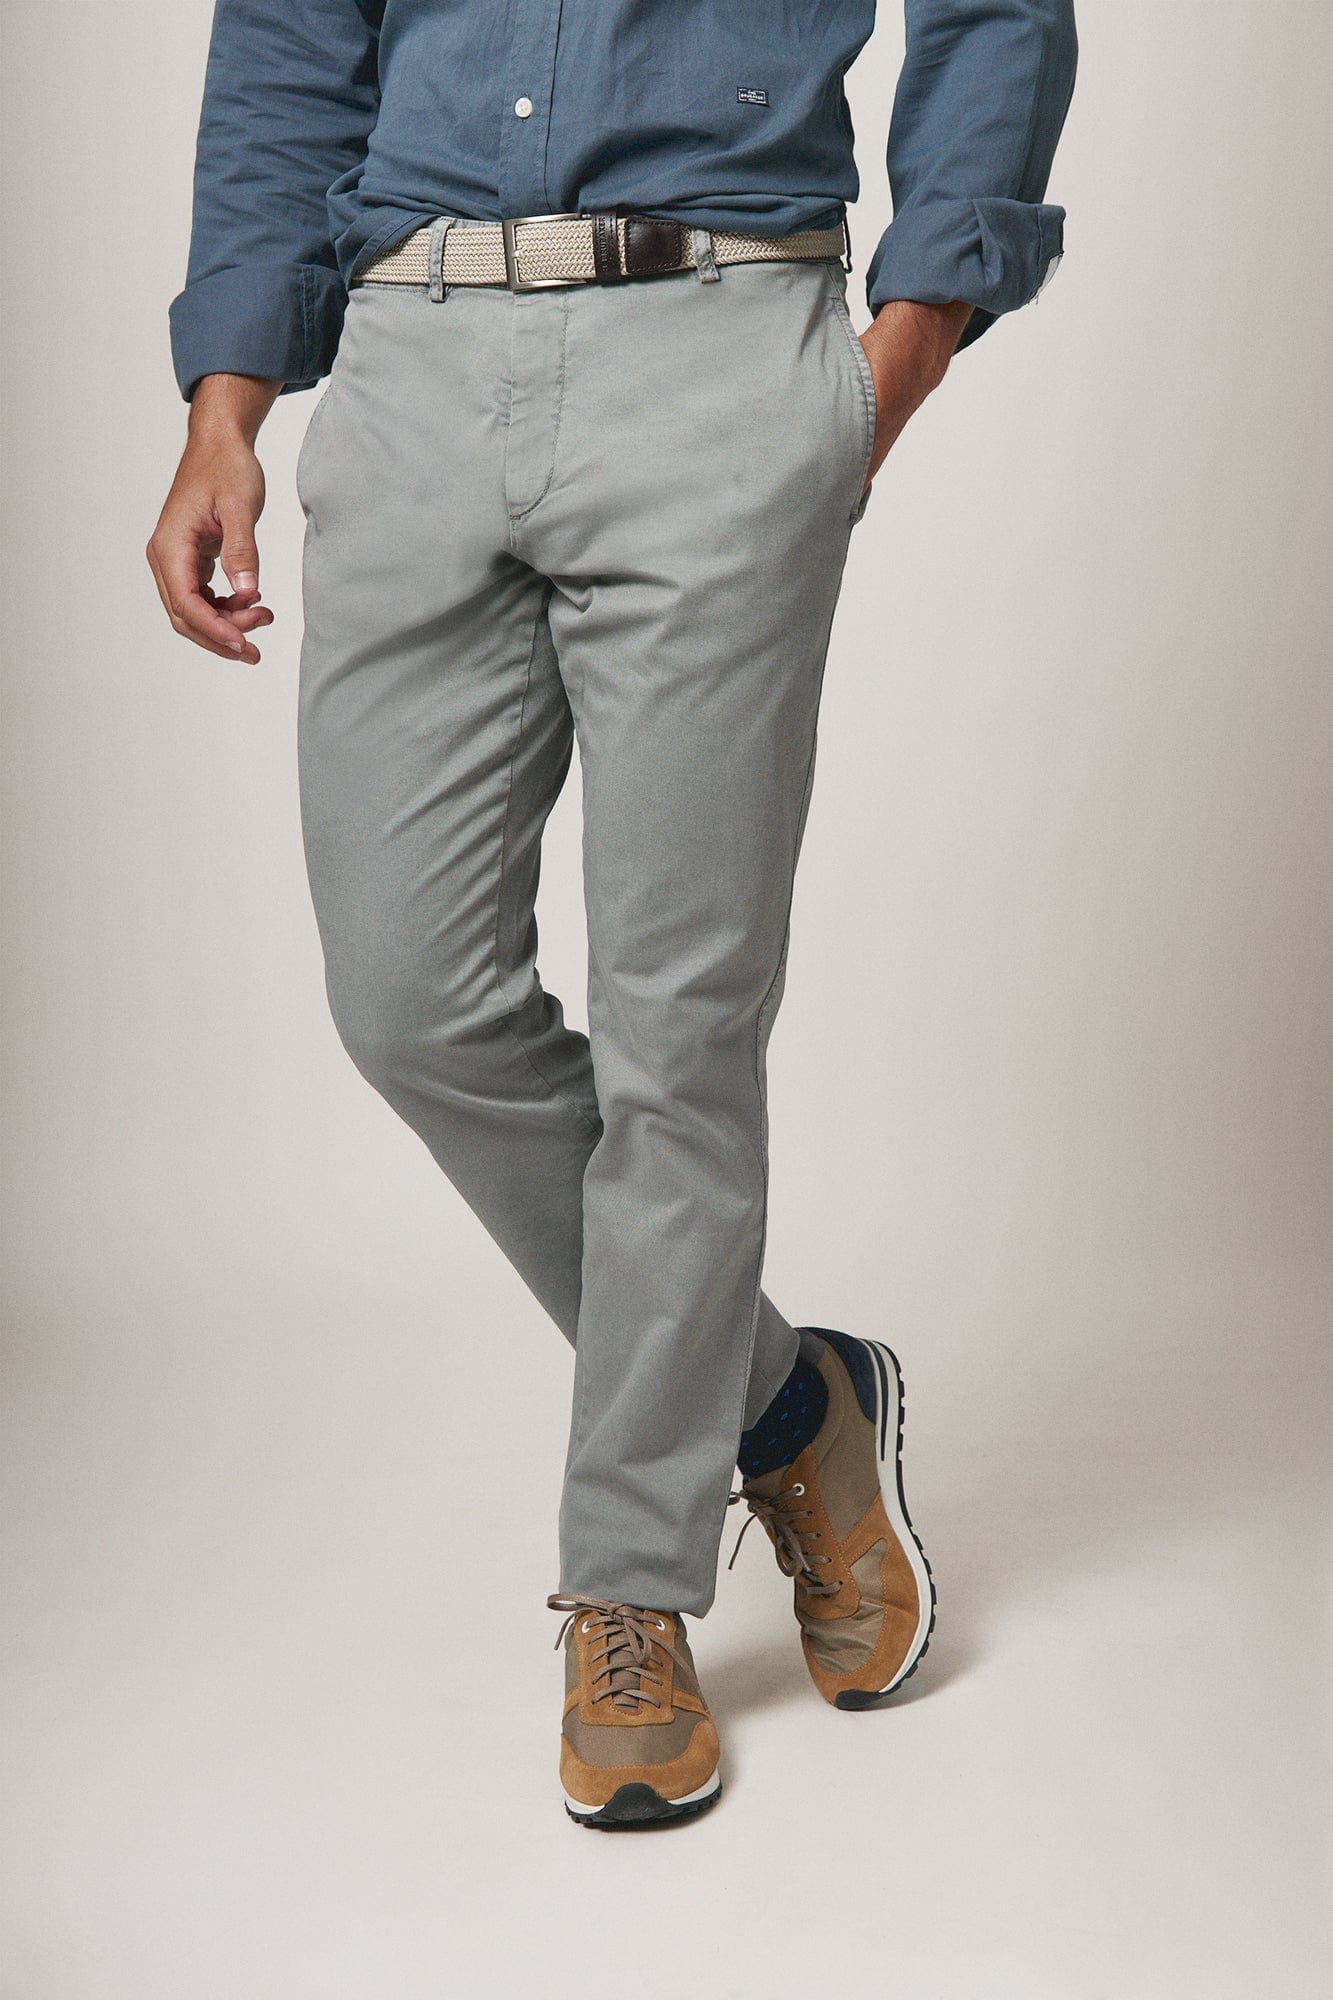 The Chino Gris